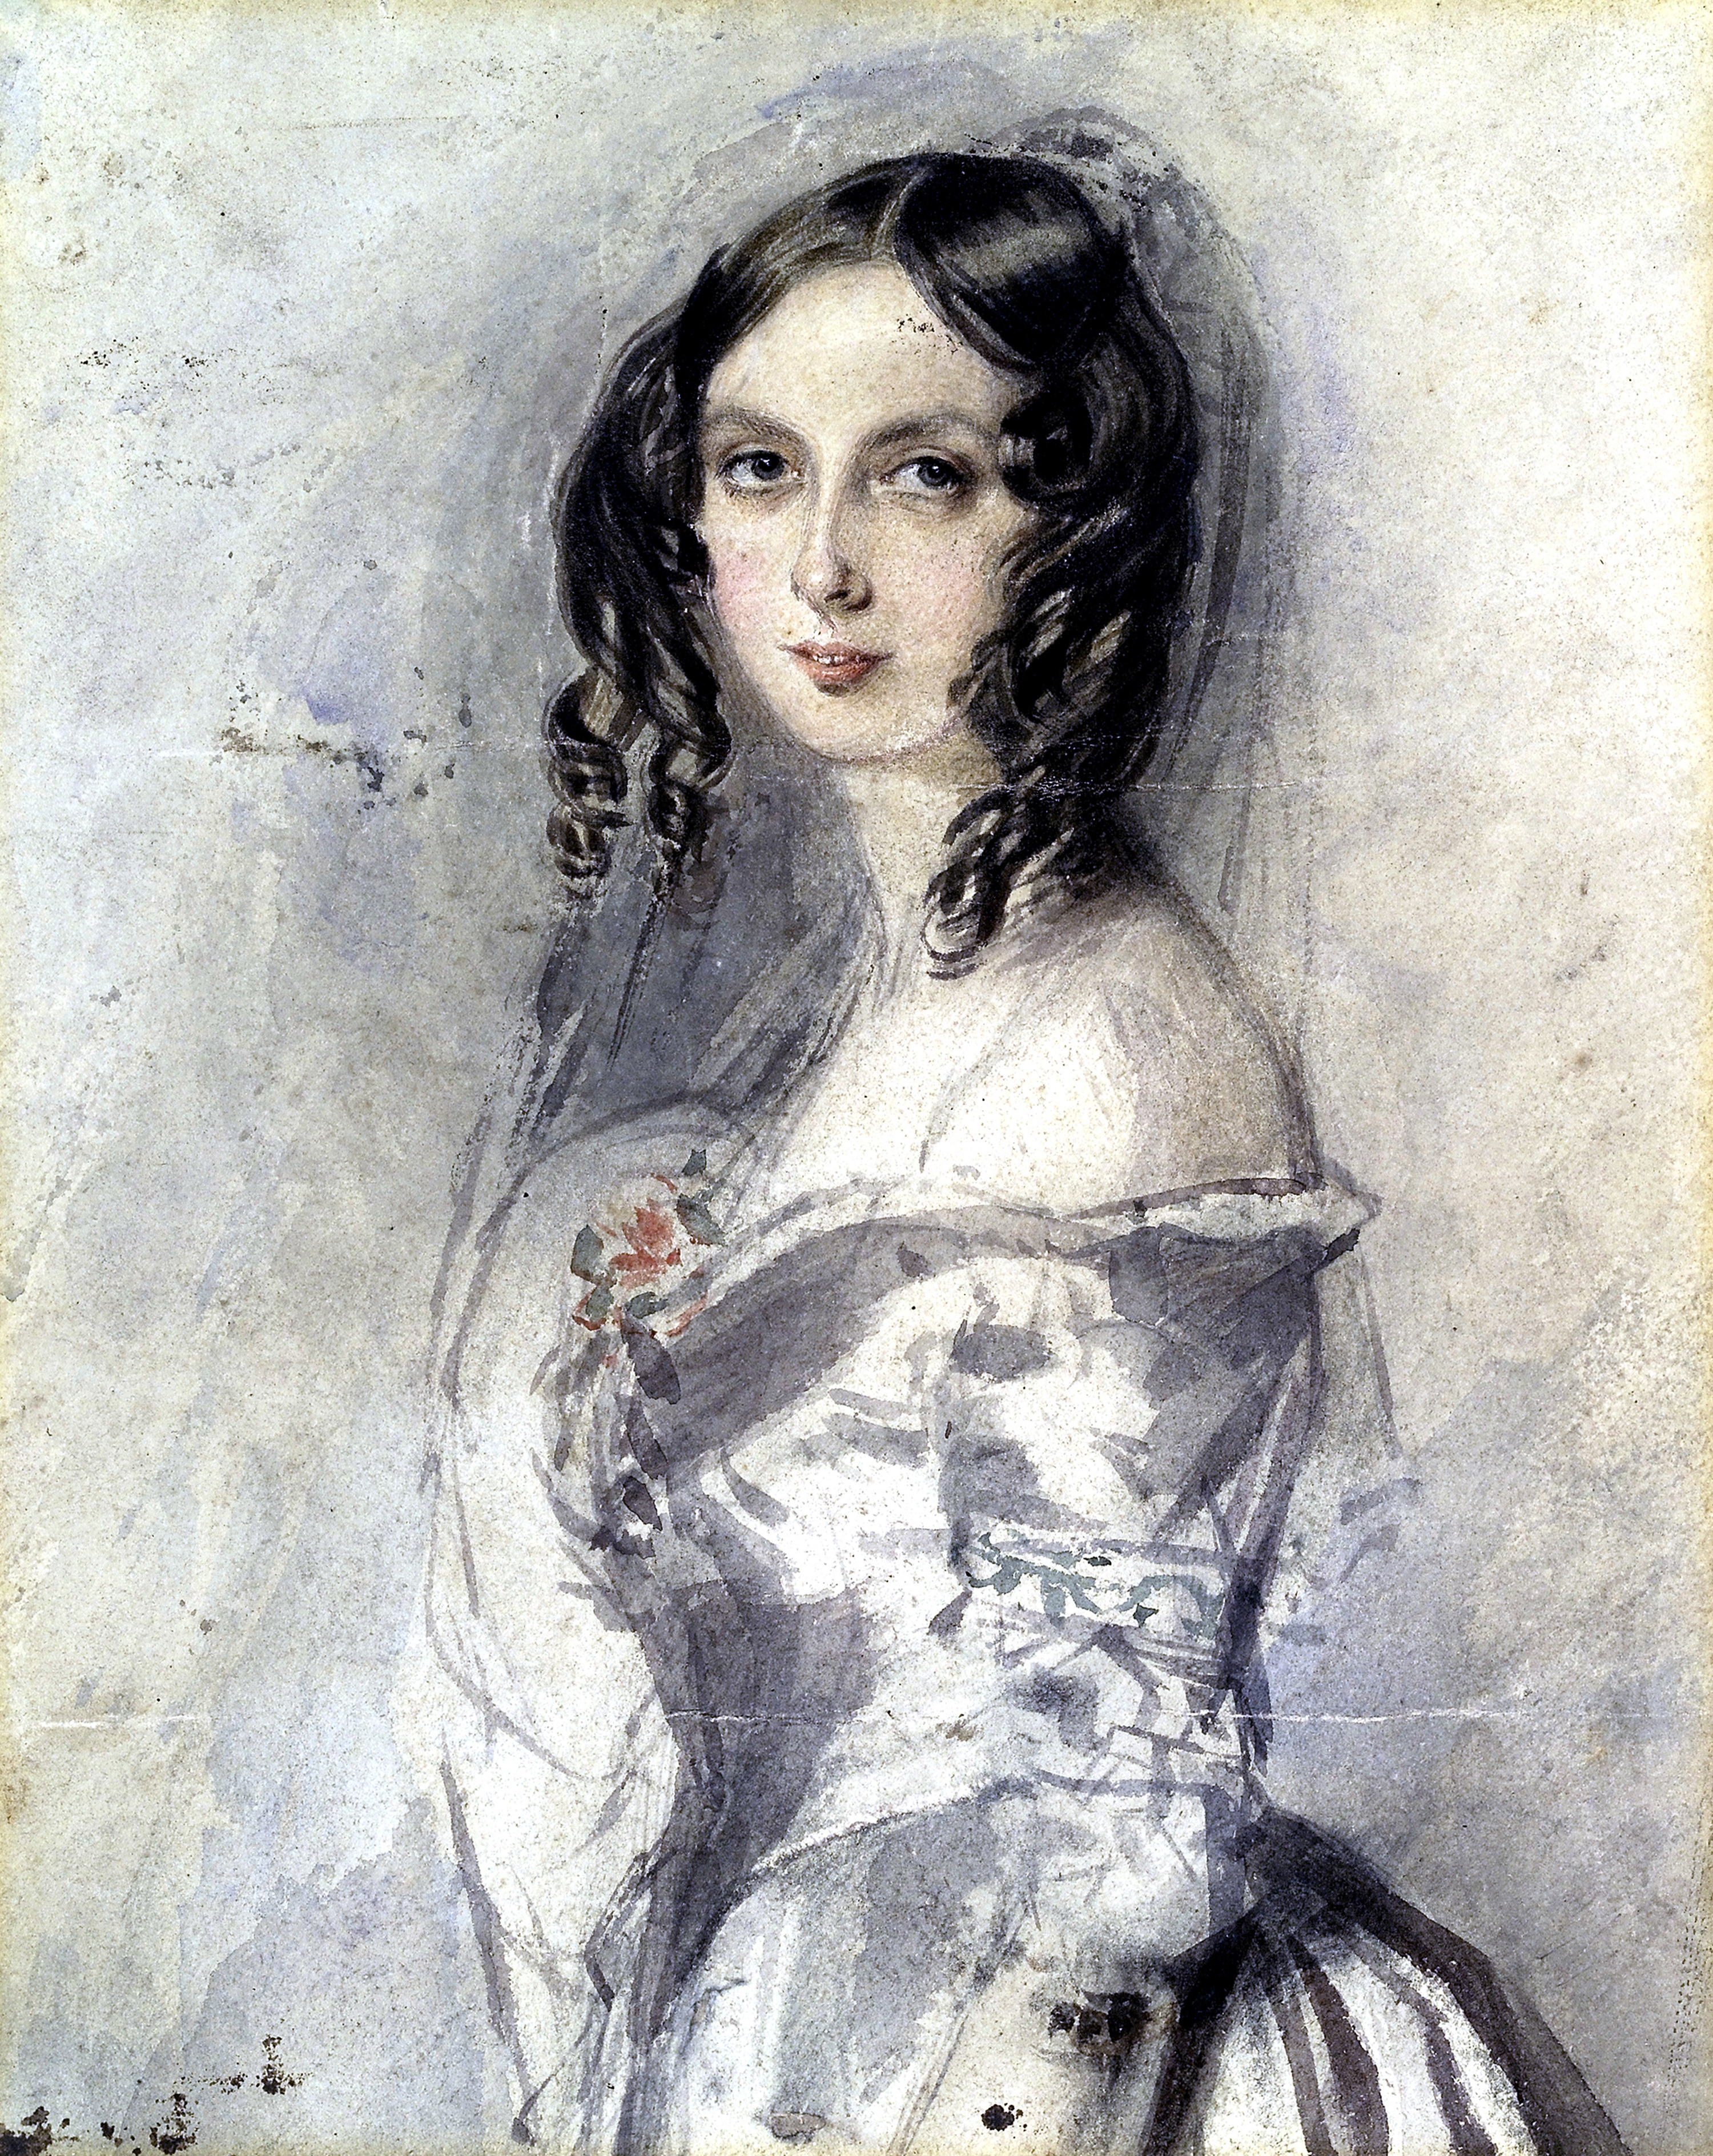 Painted portrait of Ada Lovelace, with curled hair and wearing an off the shoulder dress. Painting from circa 1835